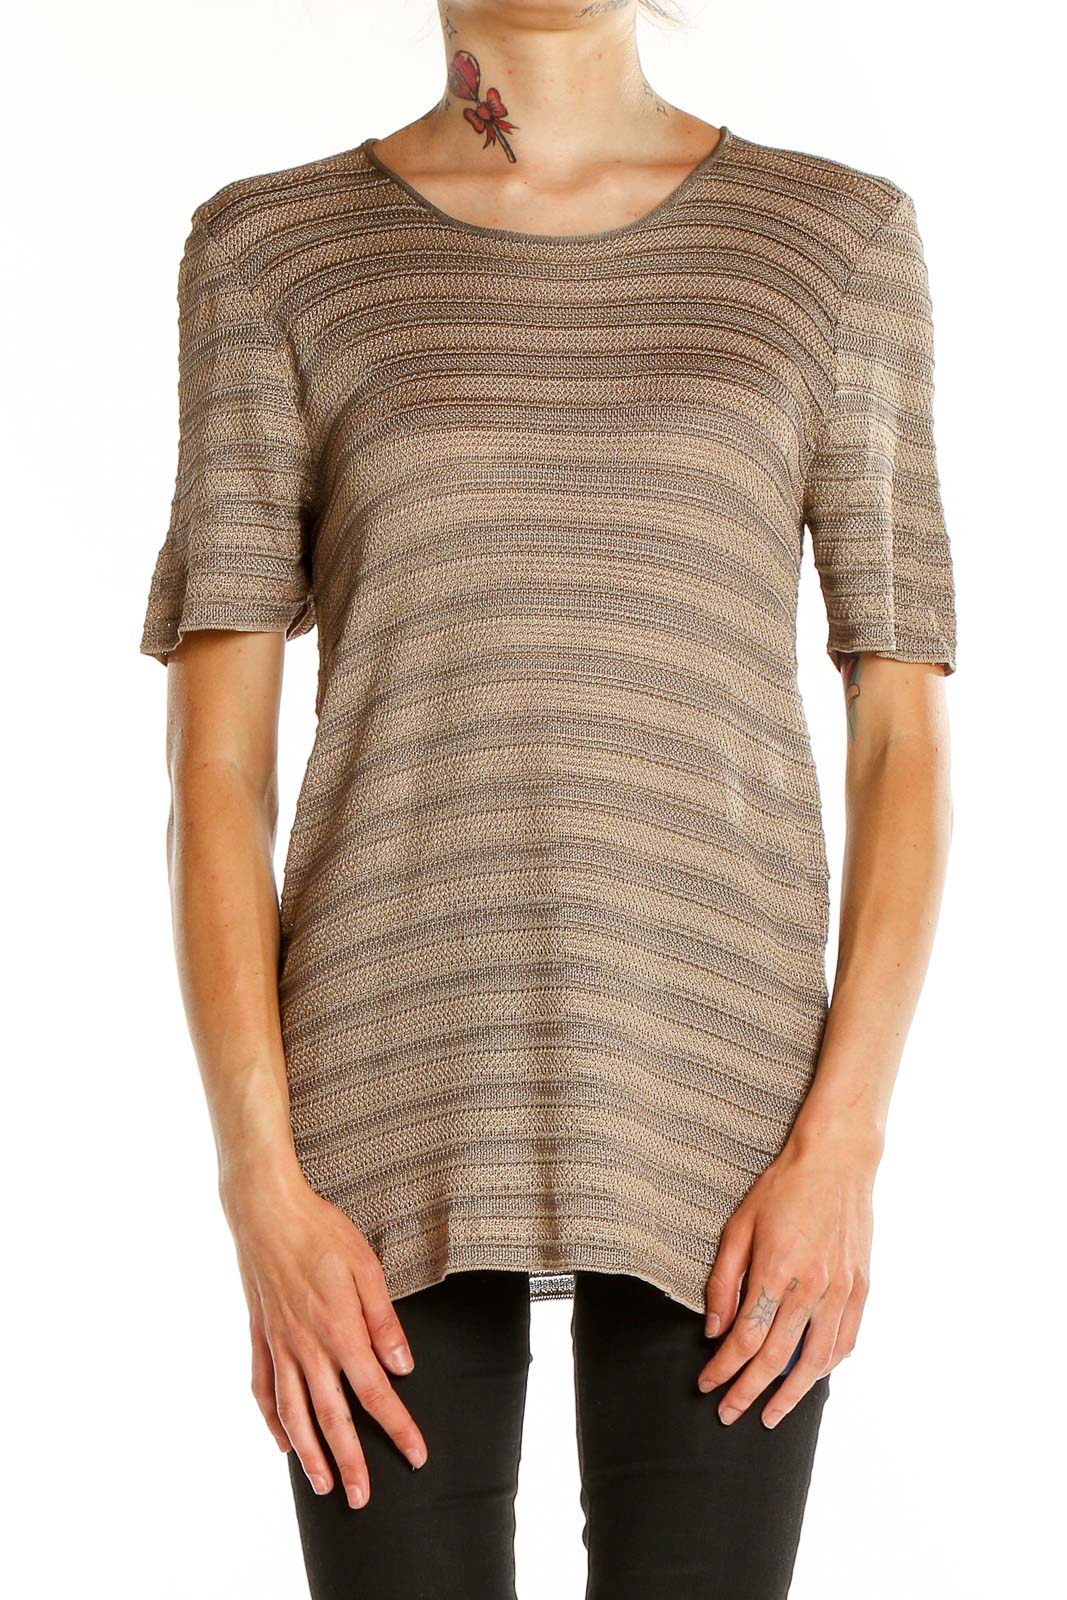 Brown Woven Top Front